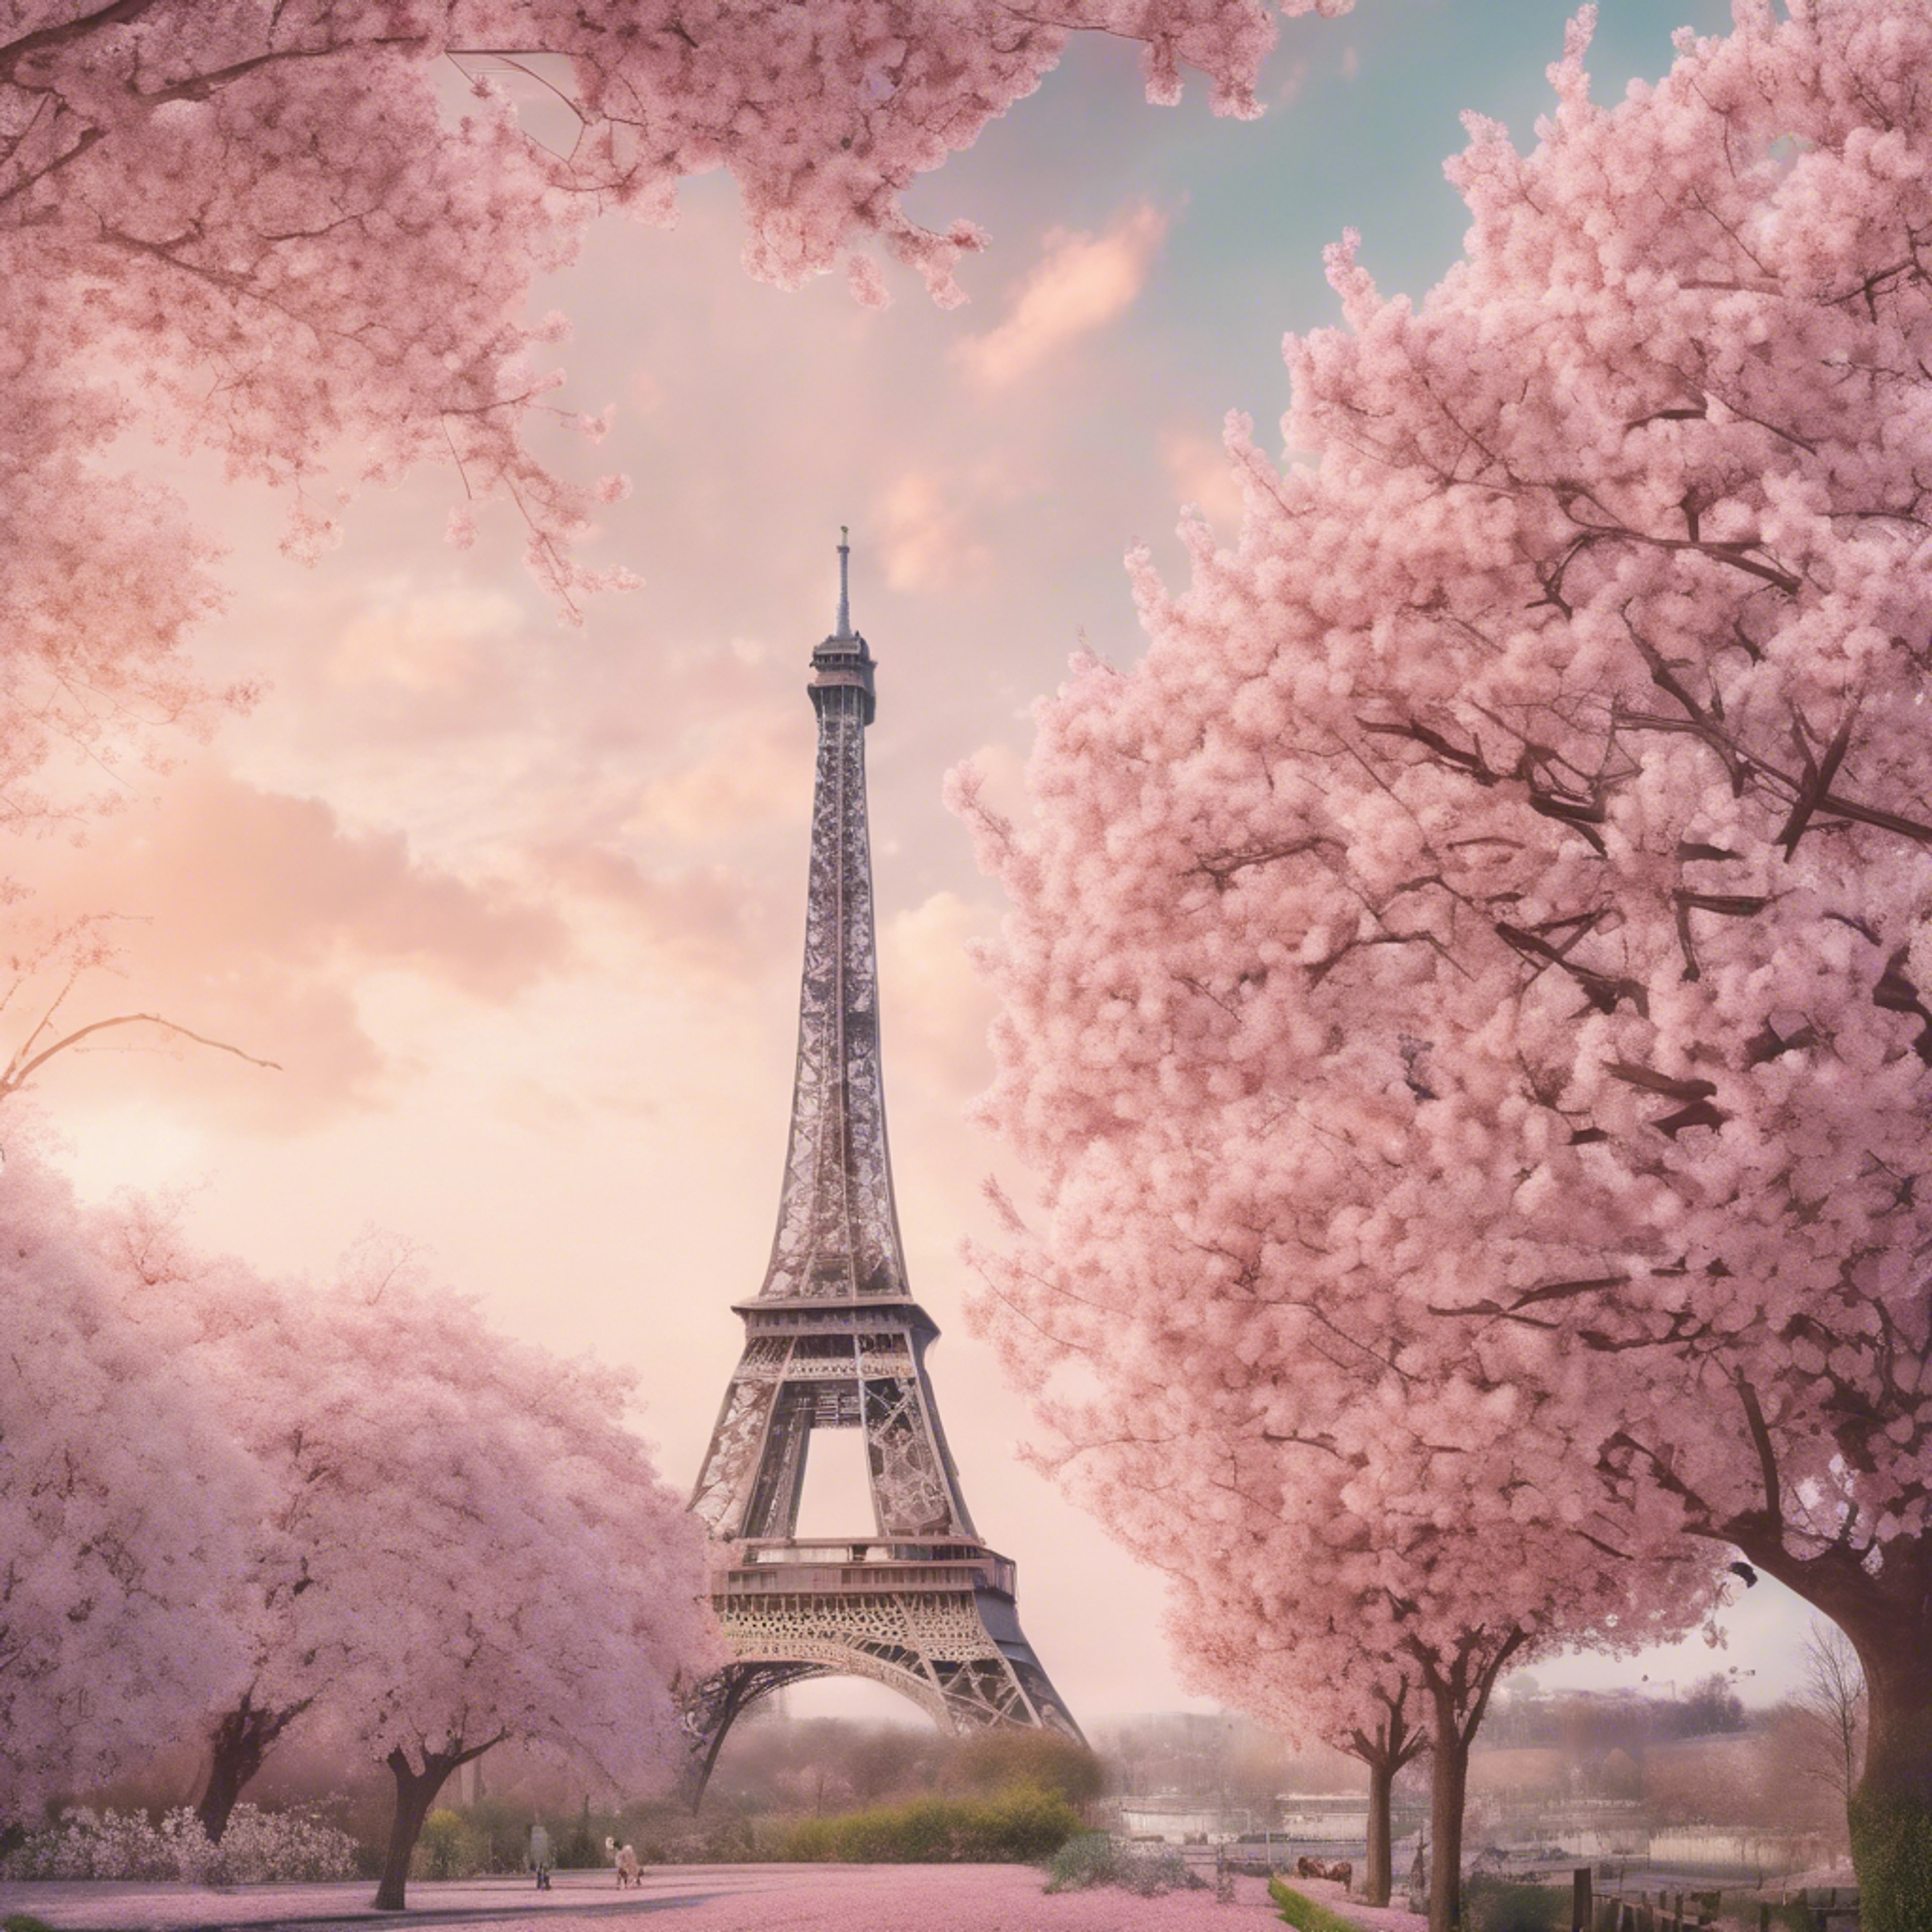 A dreamy pastel artwork of the Eiffel Tower enveloped in cherry blossoms during spring. Ფონი[34c320f998cf44e290fc]